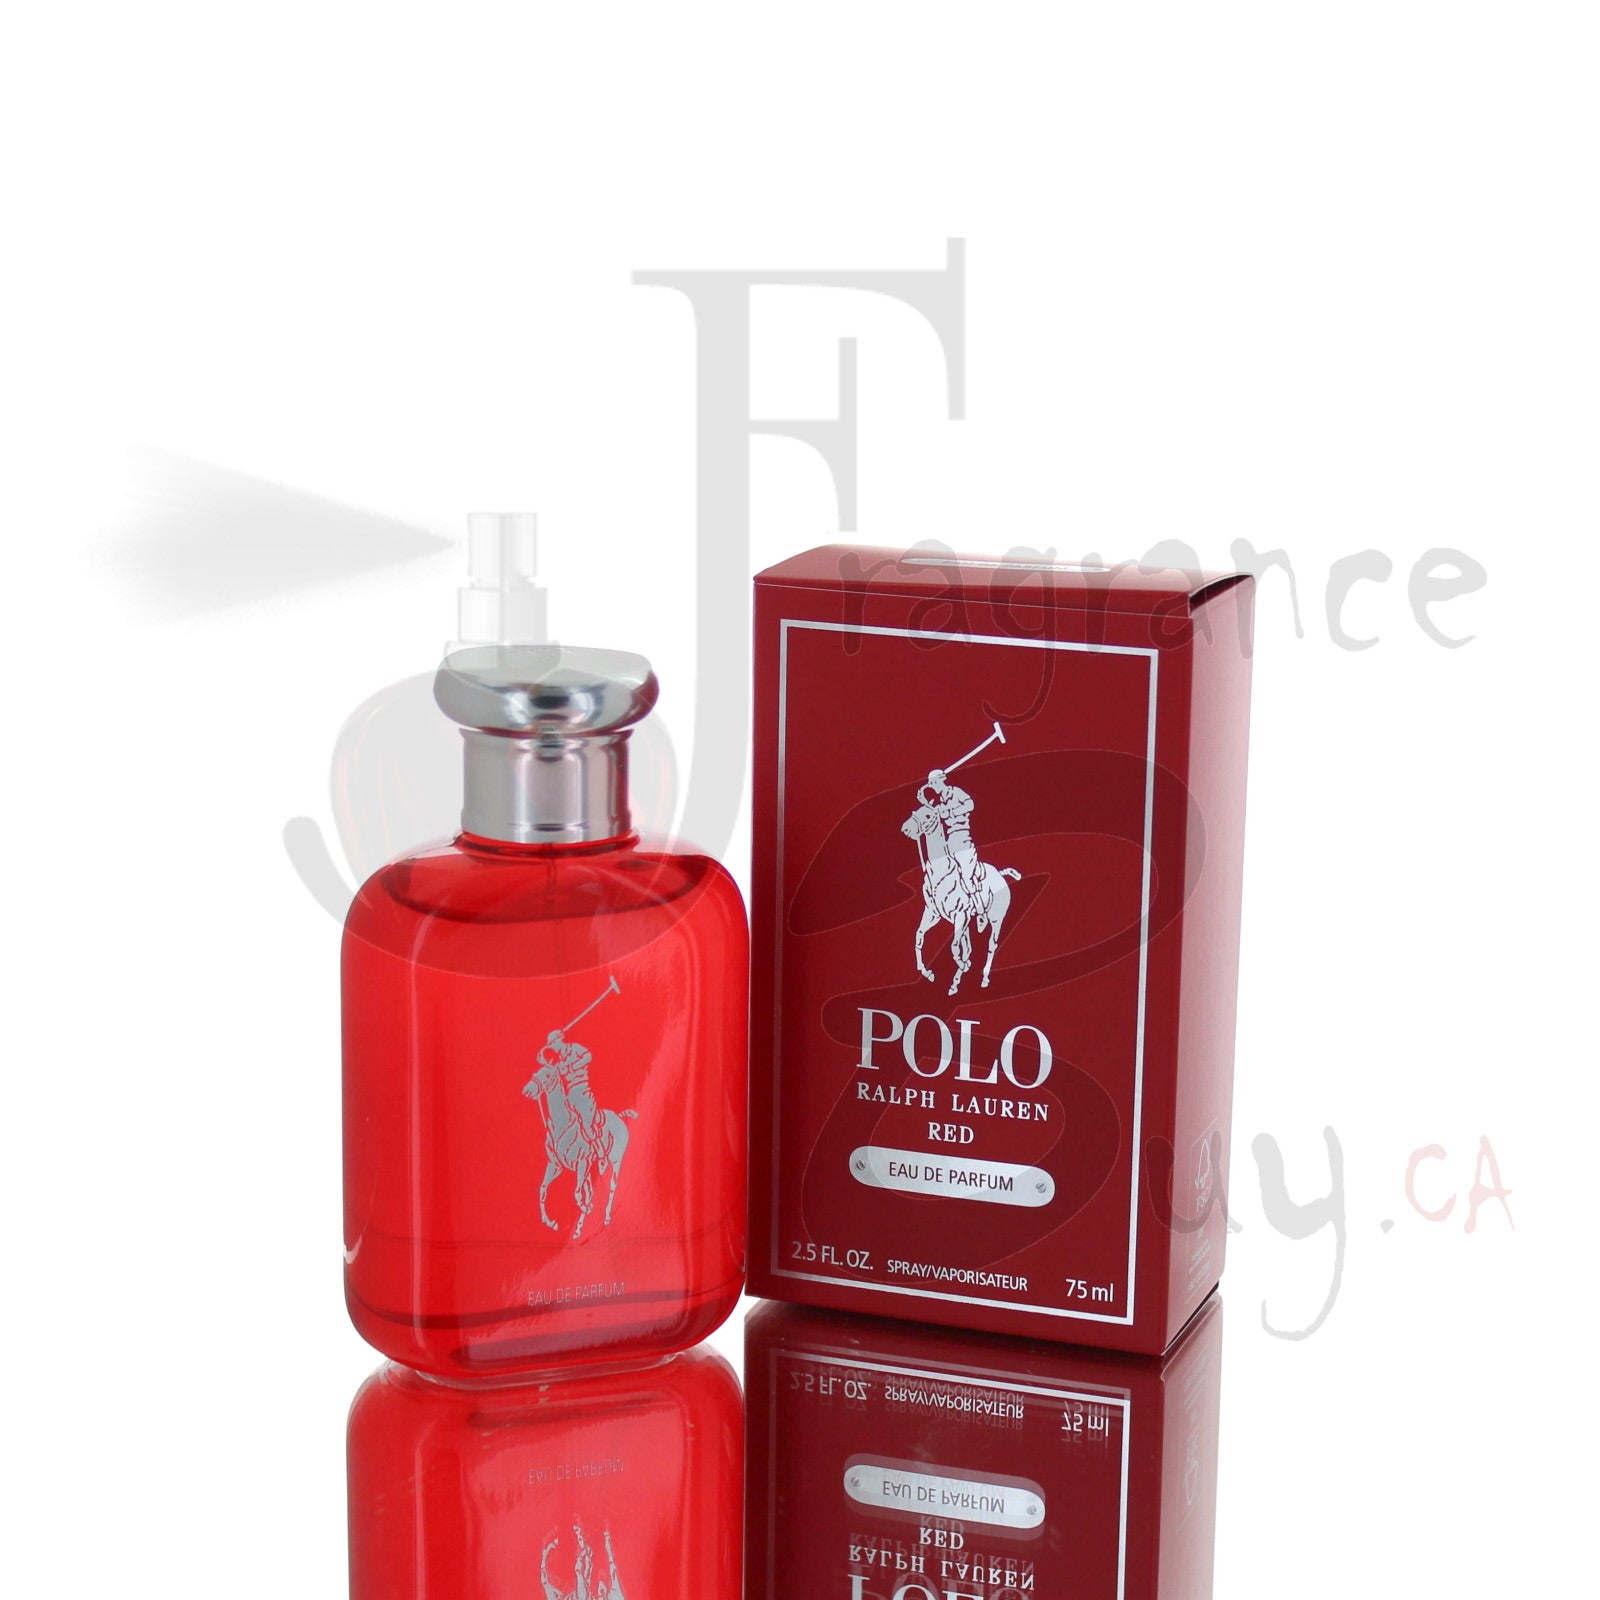 polo red edp